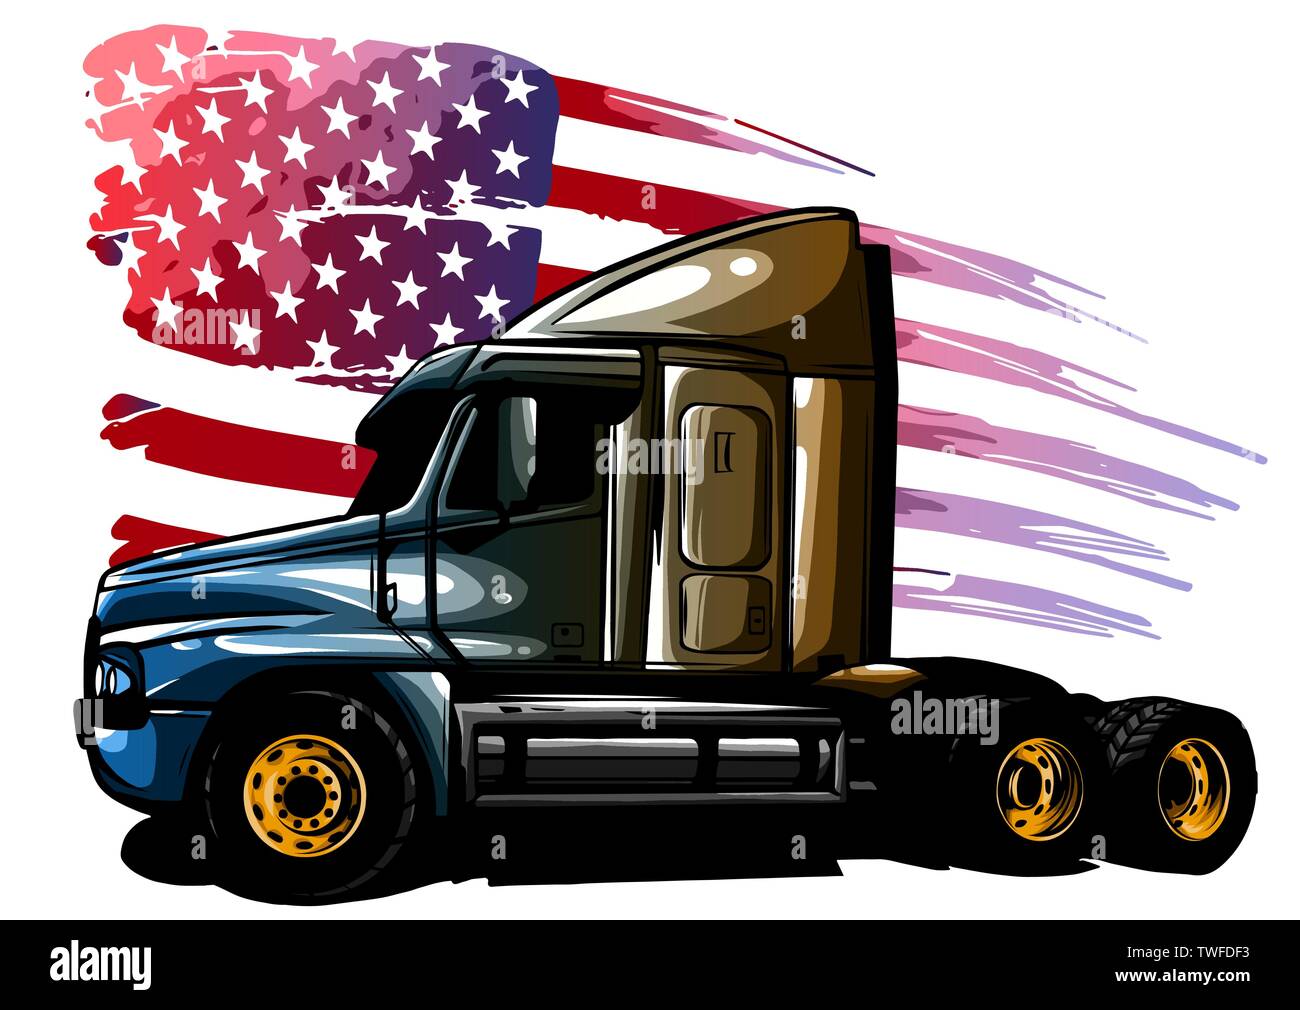 vector graphic design illustration of an American truck with stars and stripes flag Stock Vector